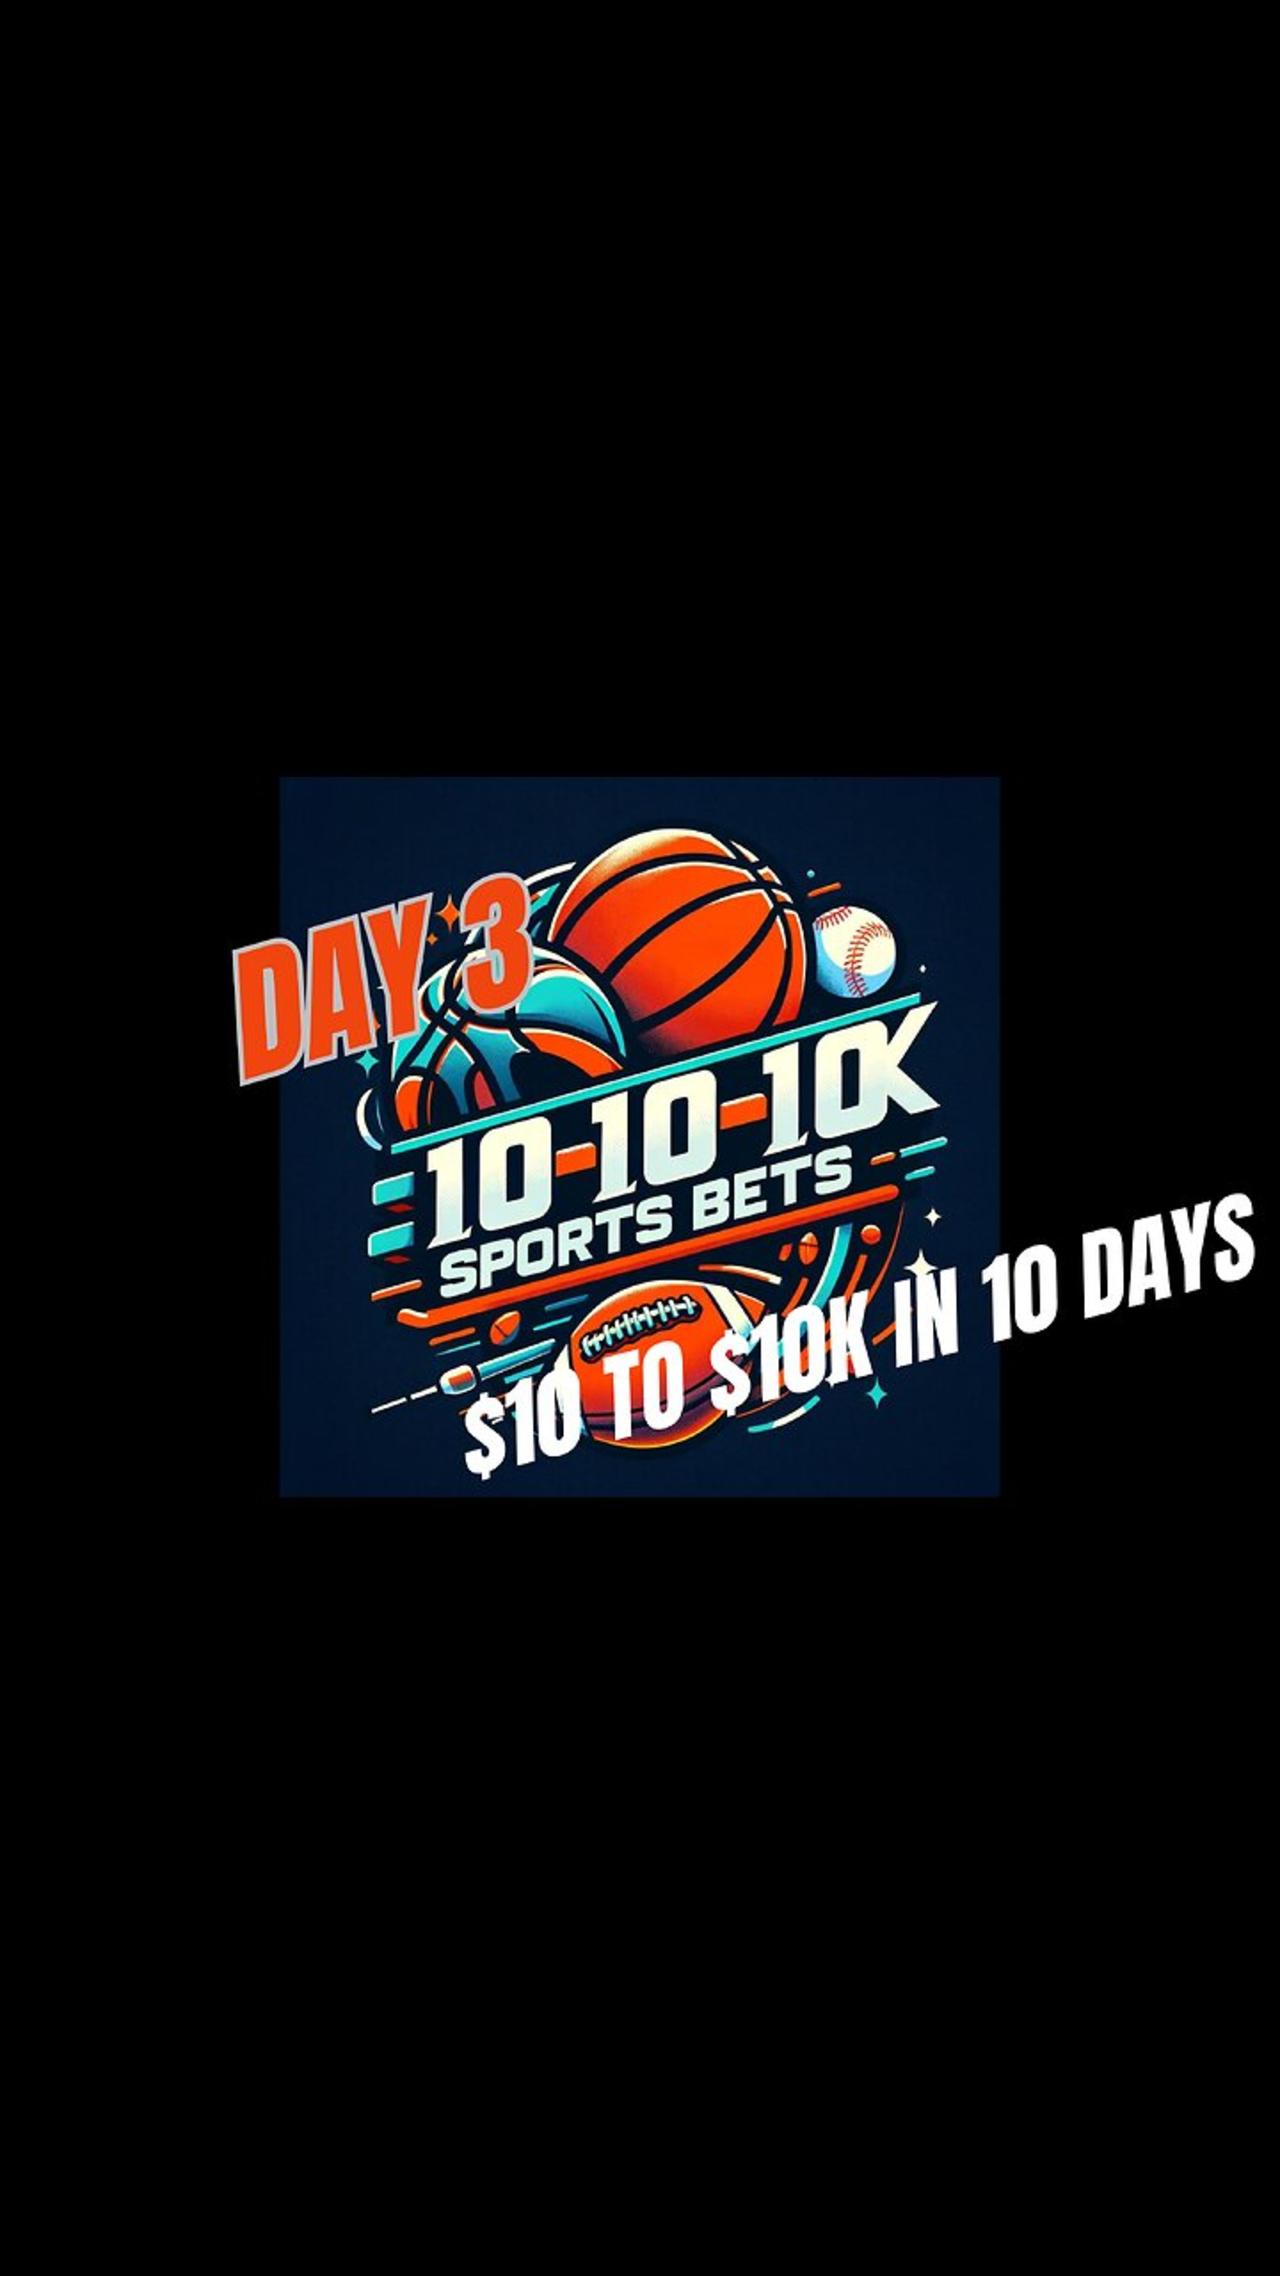 "🚀 Day 3: Day 2 a success.The $10 to $10K Betting Challenge | Epic Sports Betting Journey Begins!"